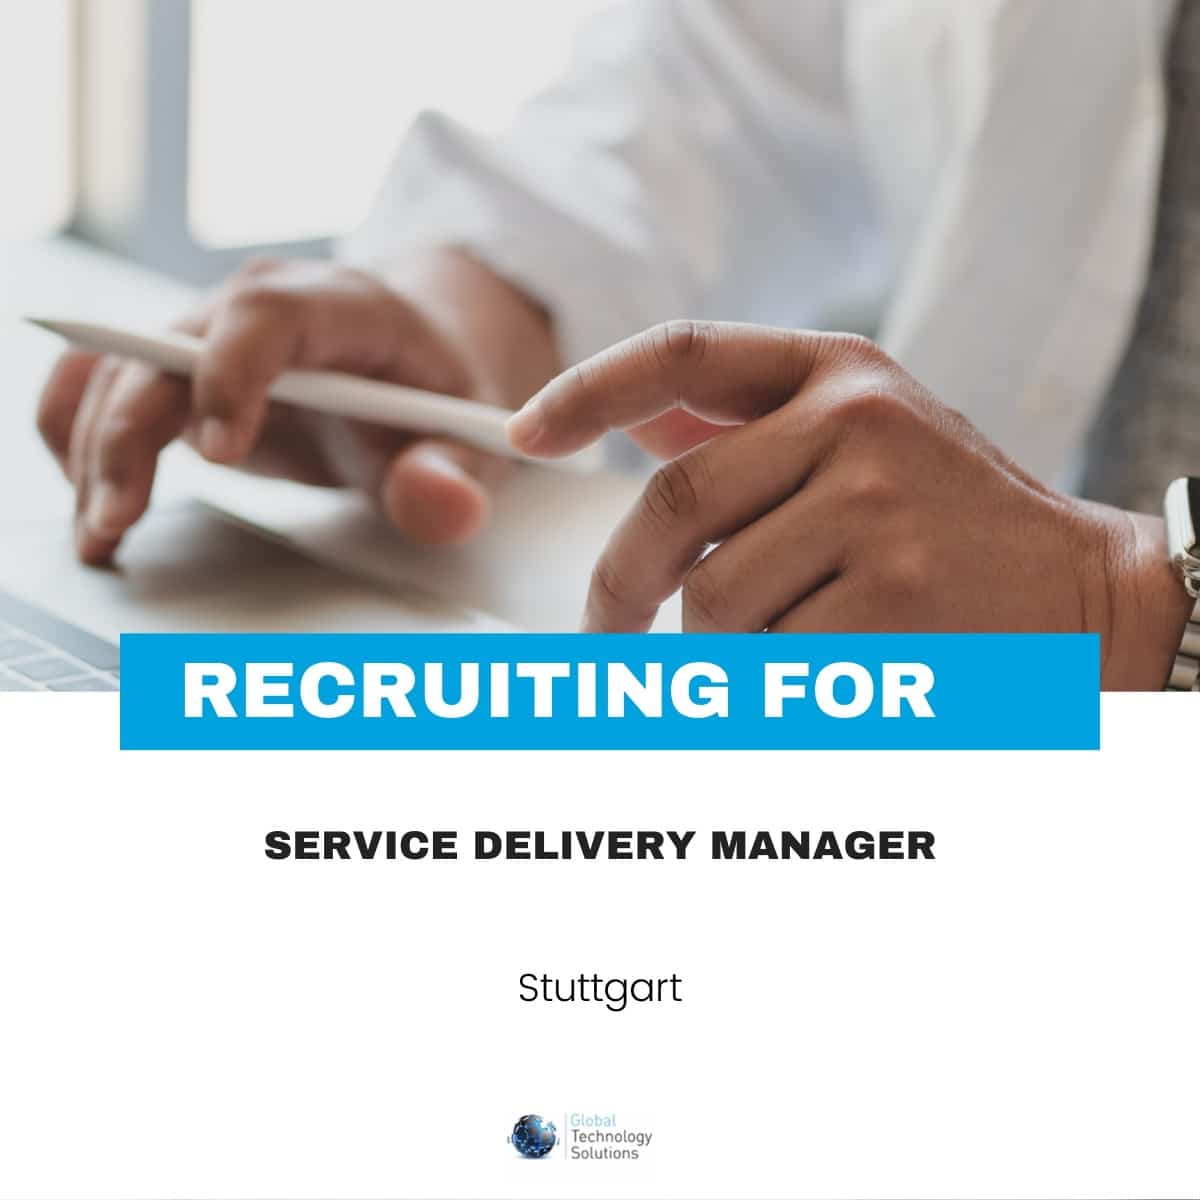 Service Delivery Manager role